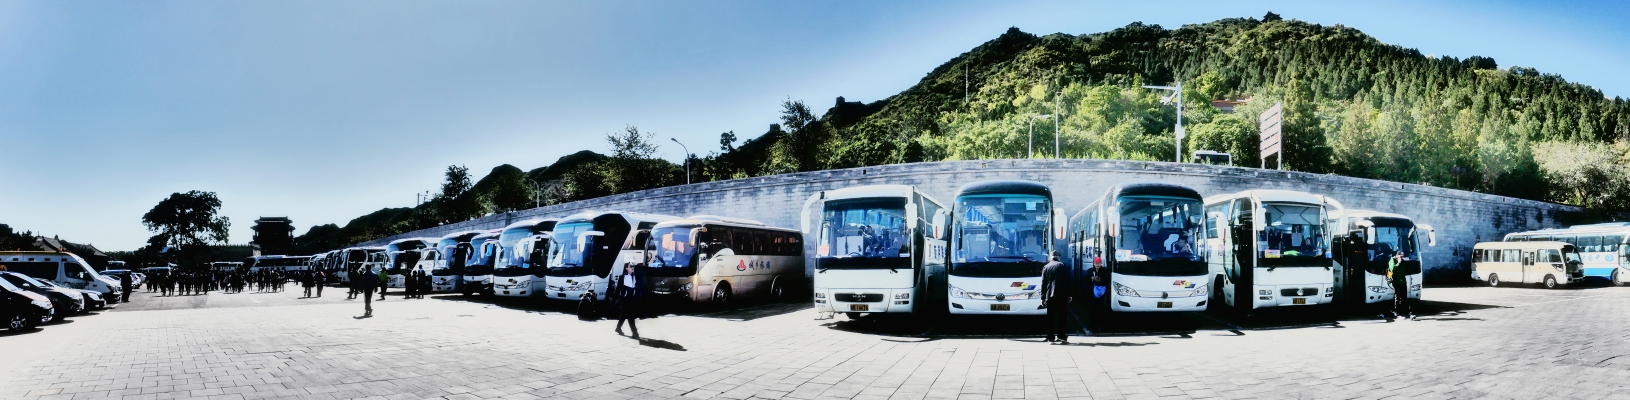 Great Wall Bus Park